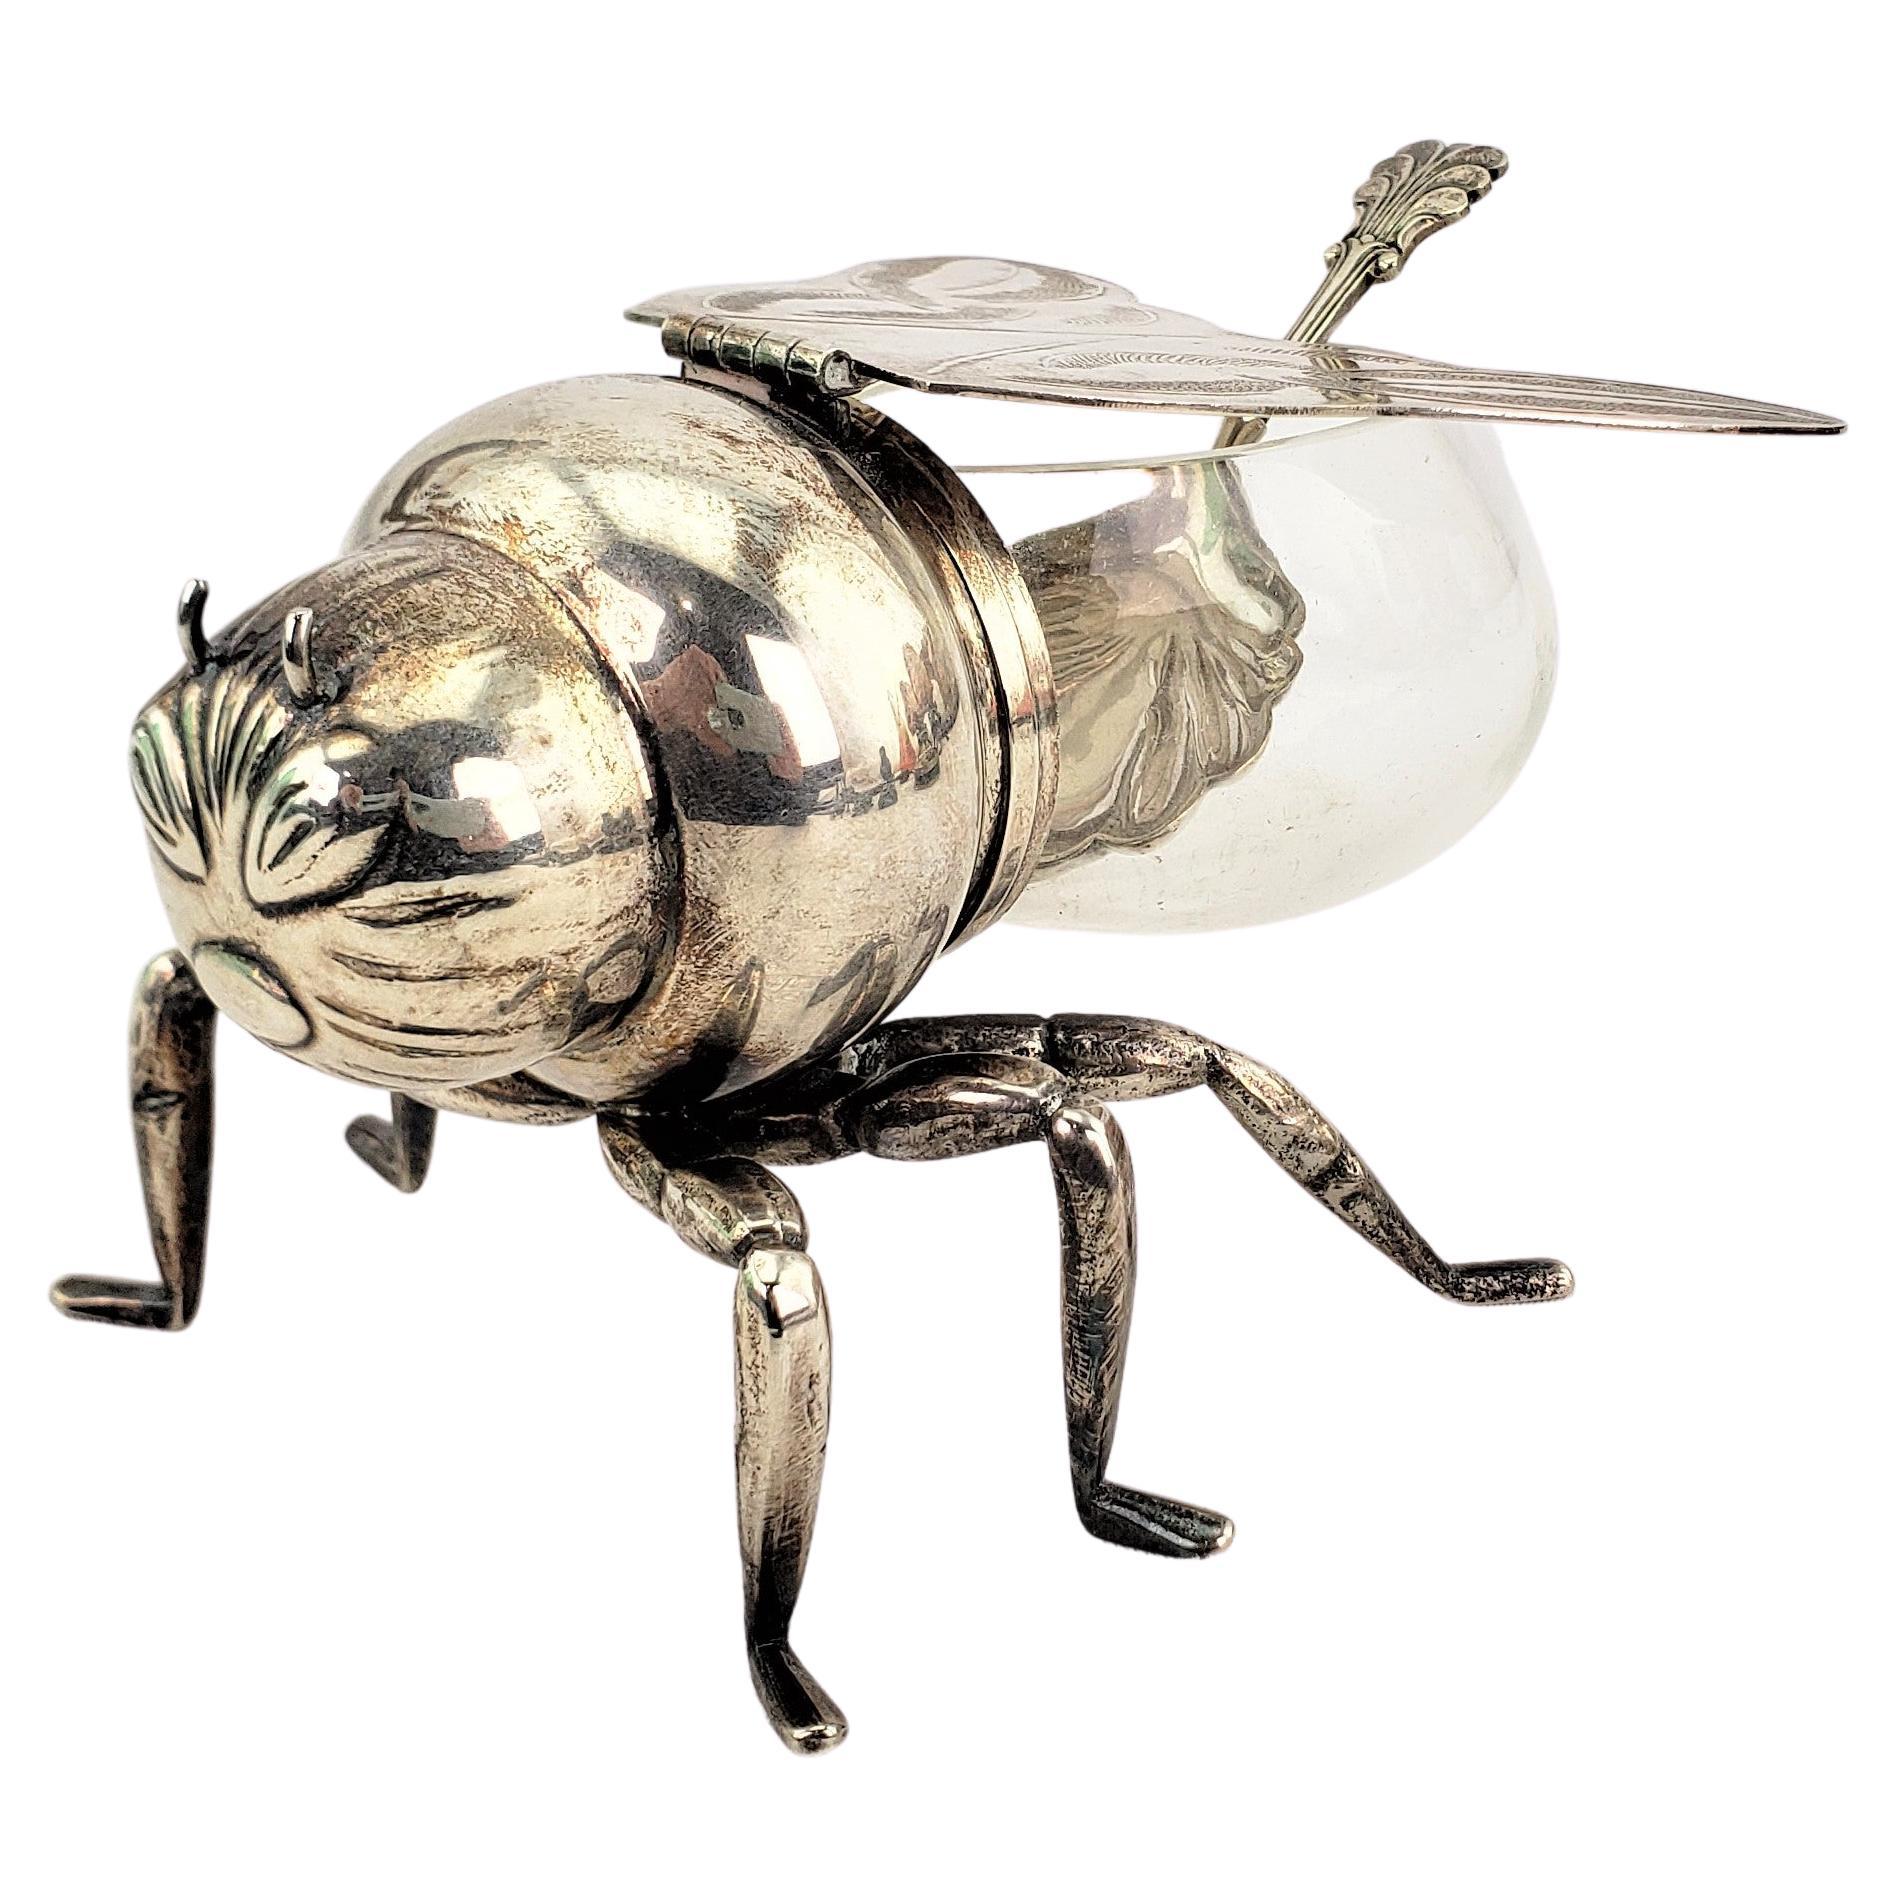 Antique English Silver Plated & Glass Figural Bee or Wasp Condiment or Honey Pot